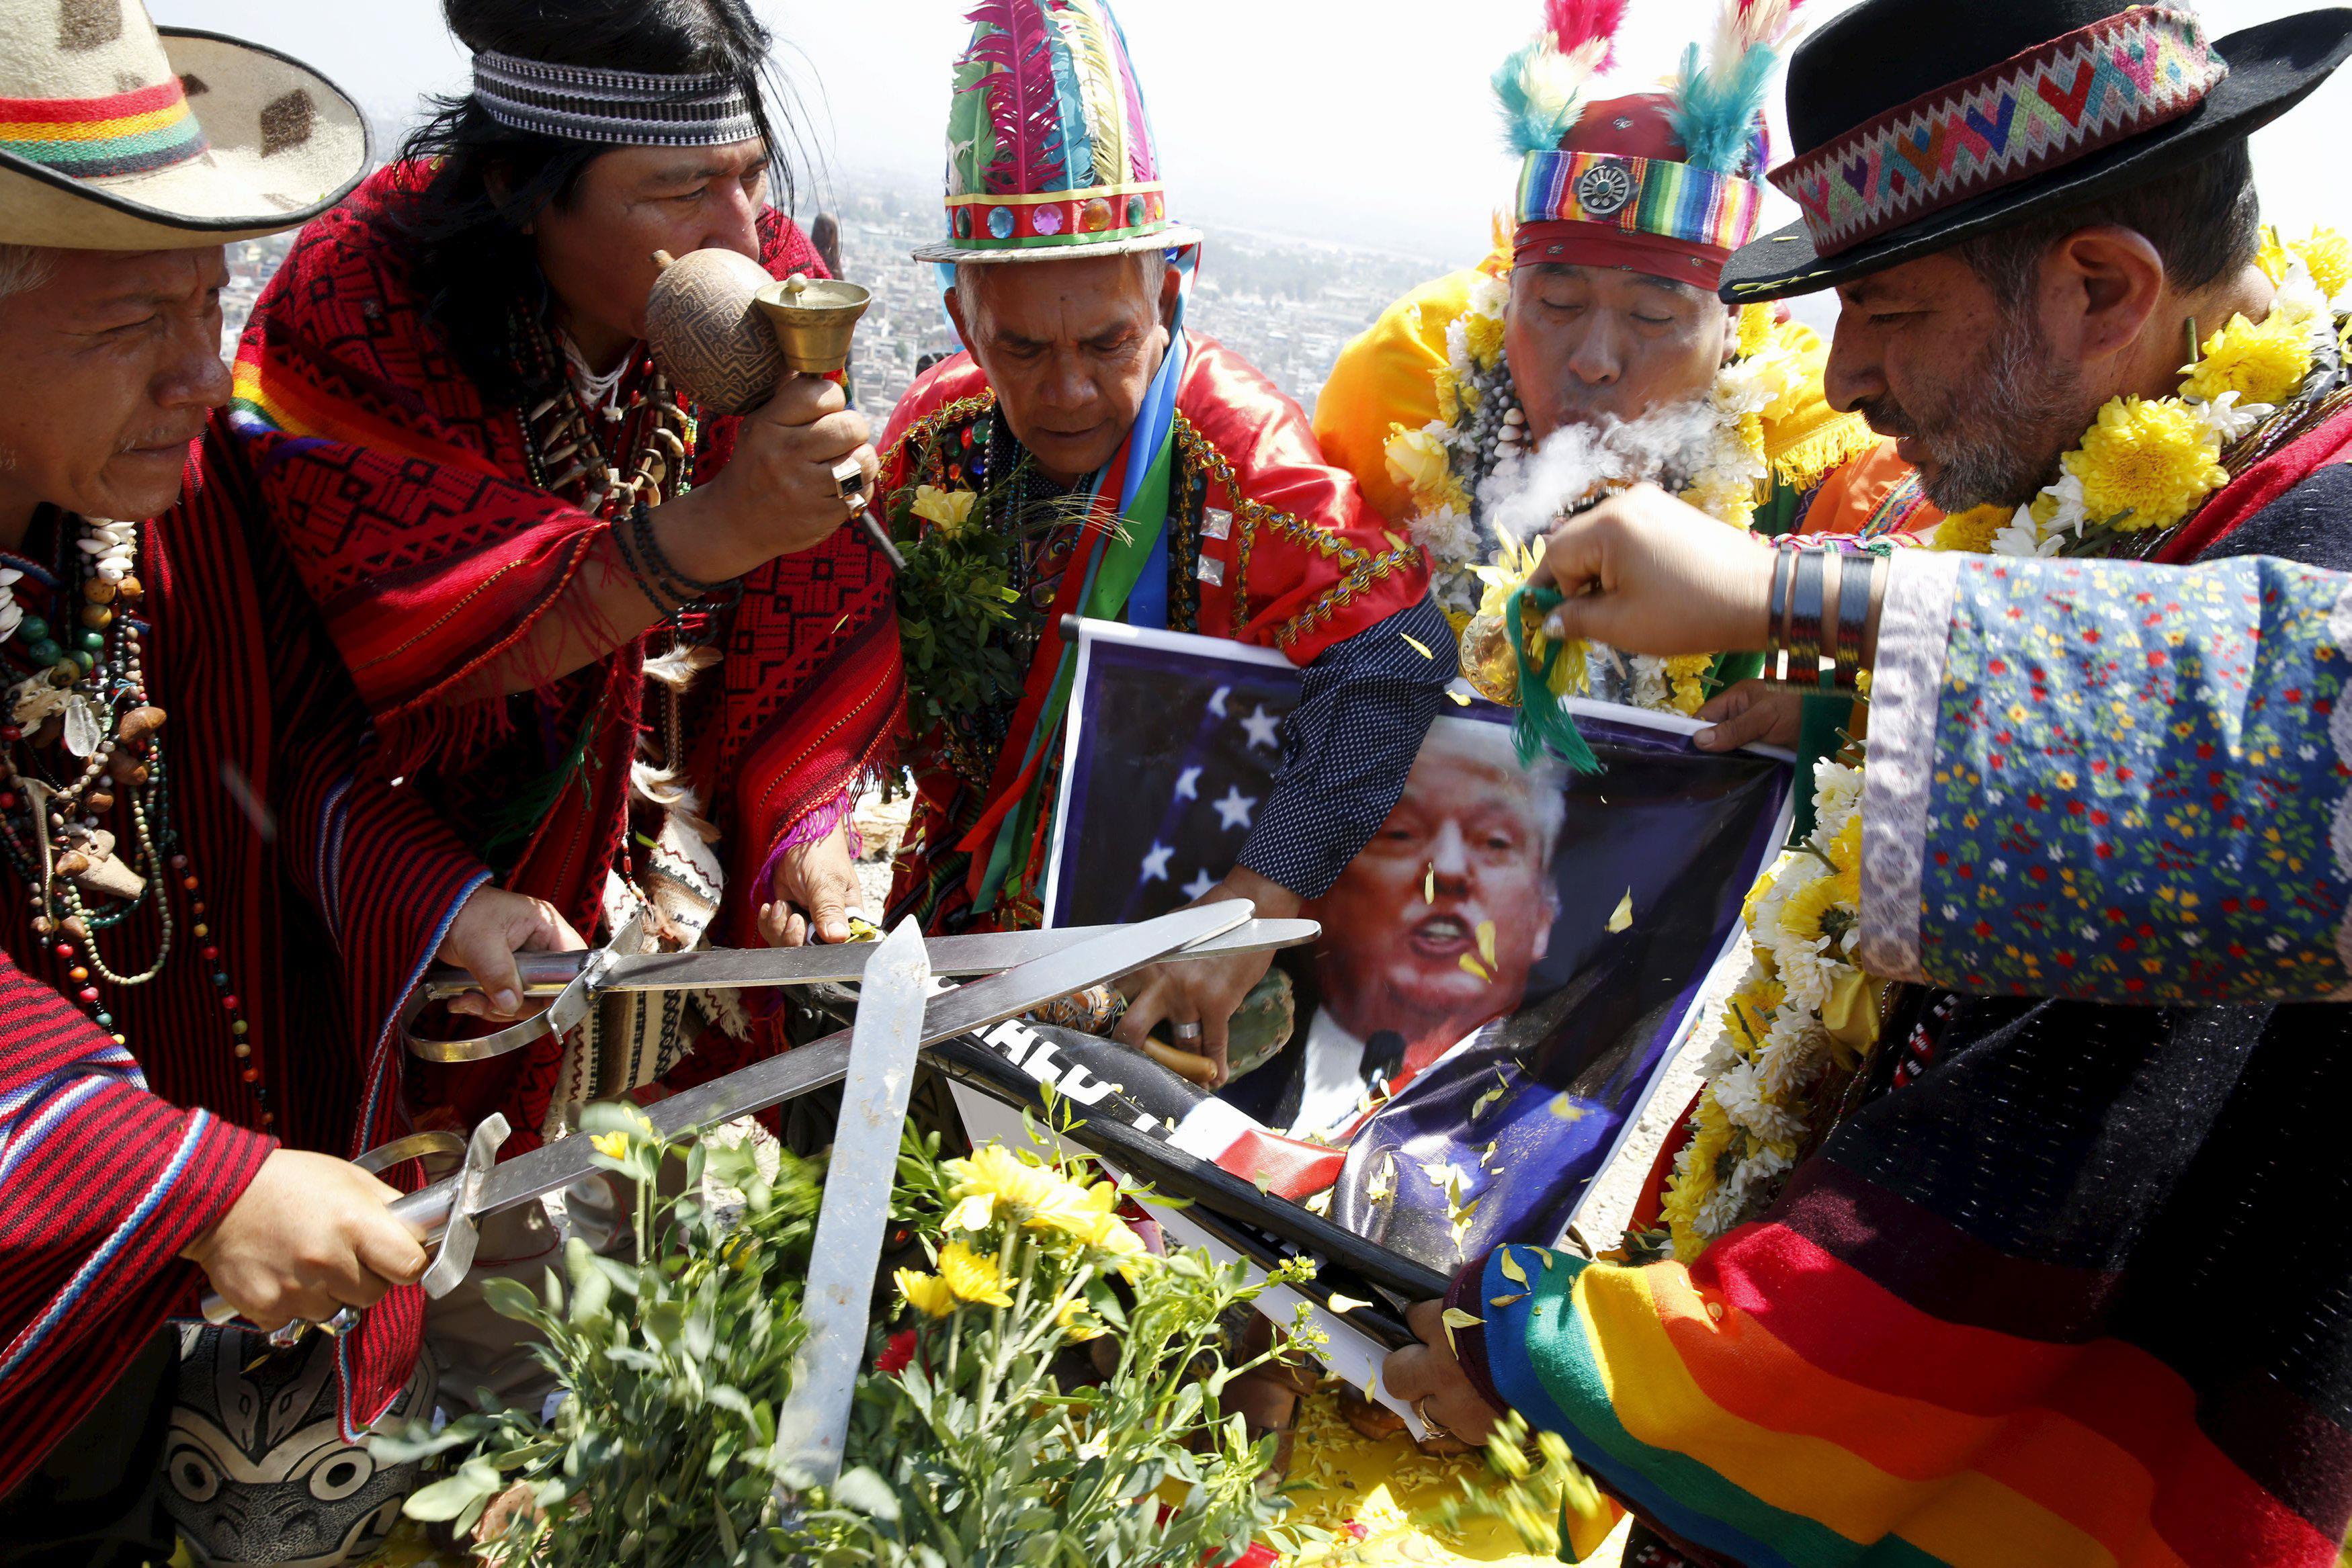 Peruvian shamans holding a poster of U.S. Republican presidential candidate Donald Trump perform a r